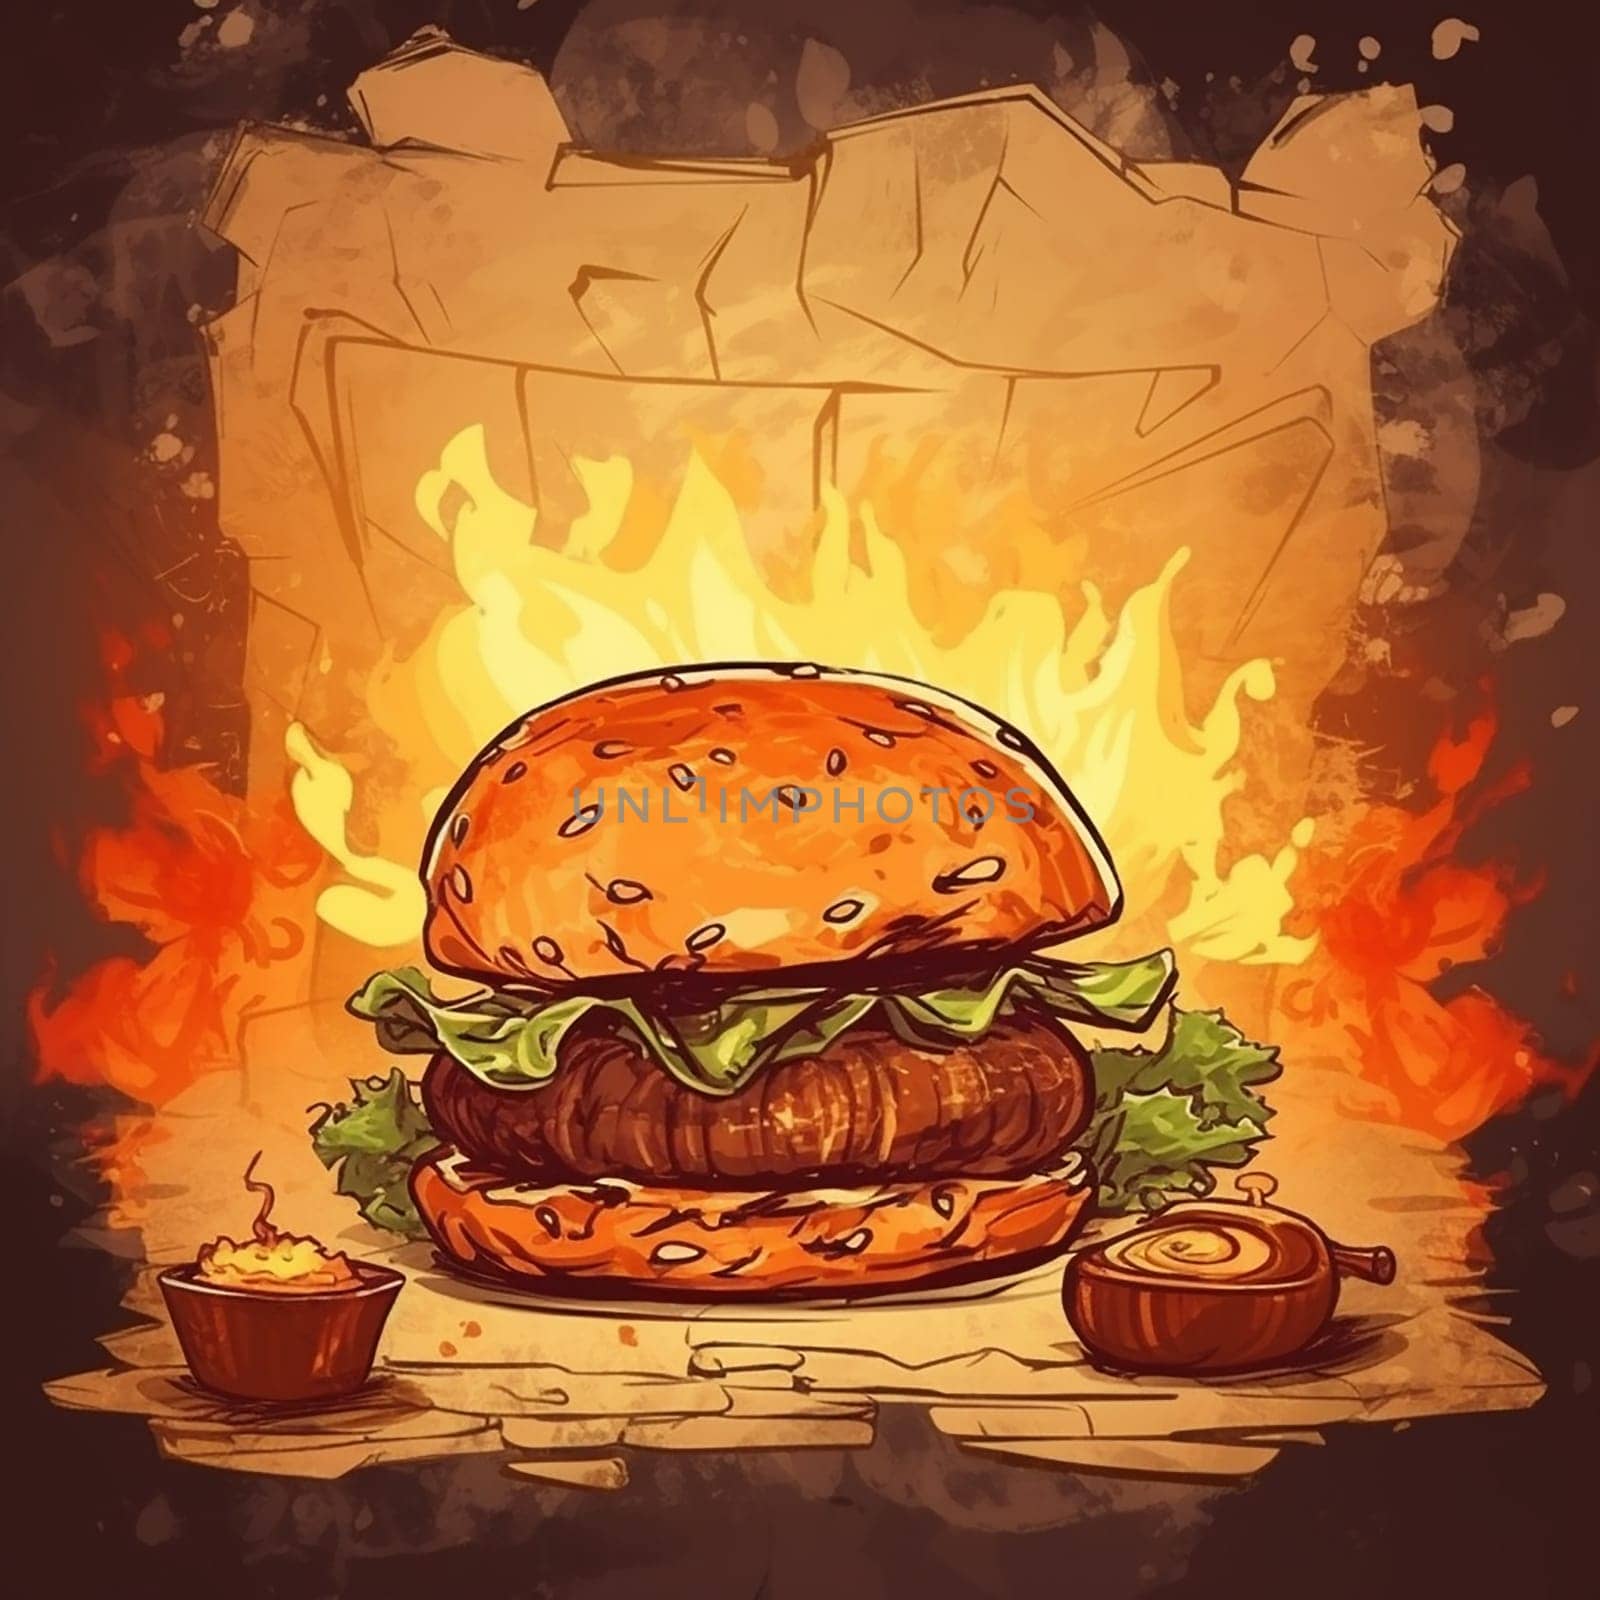 Illustration of a flame-grilled burger with lettuce and condiments on a fiery background.